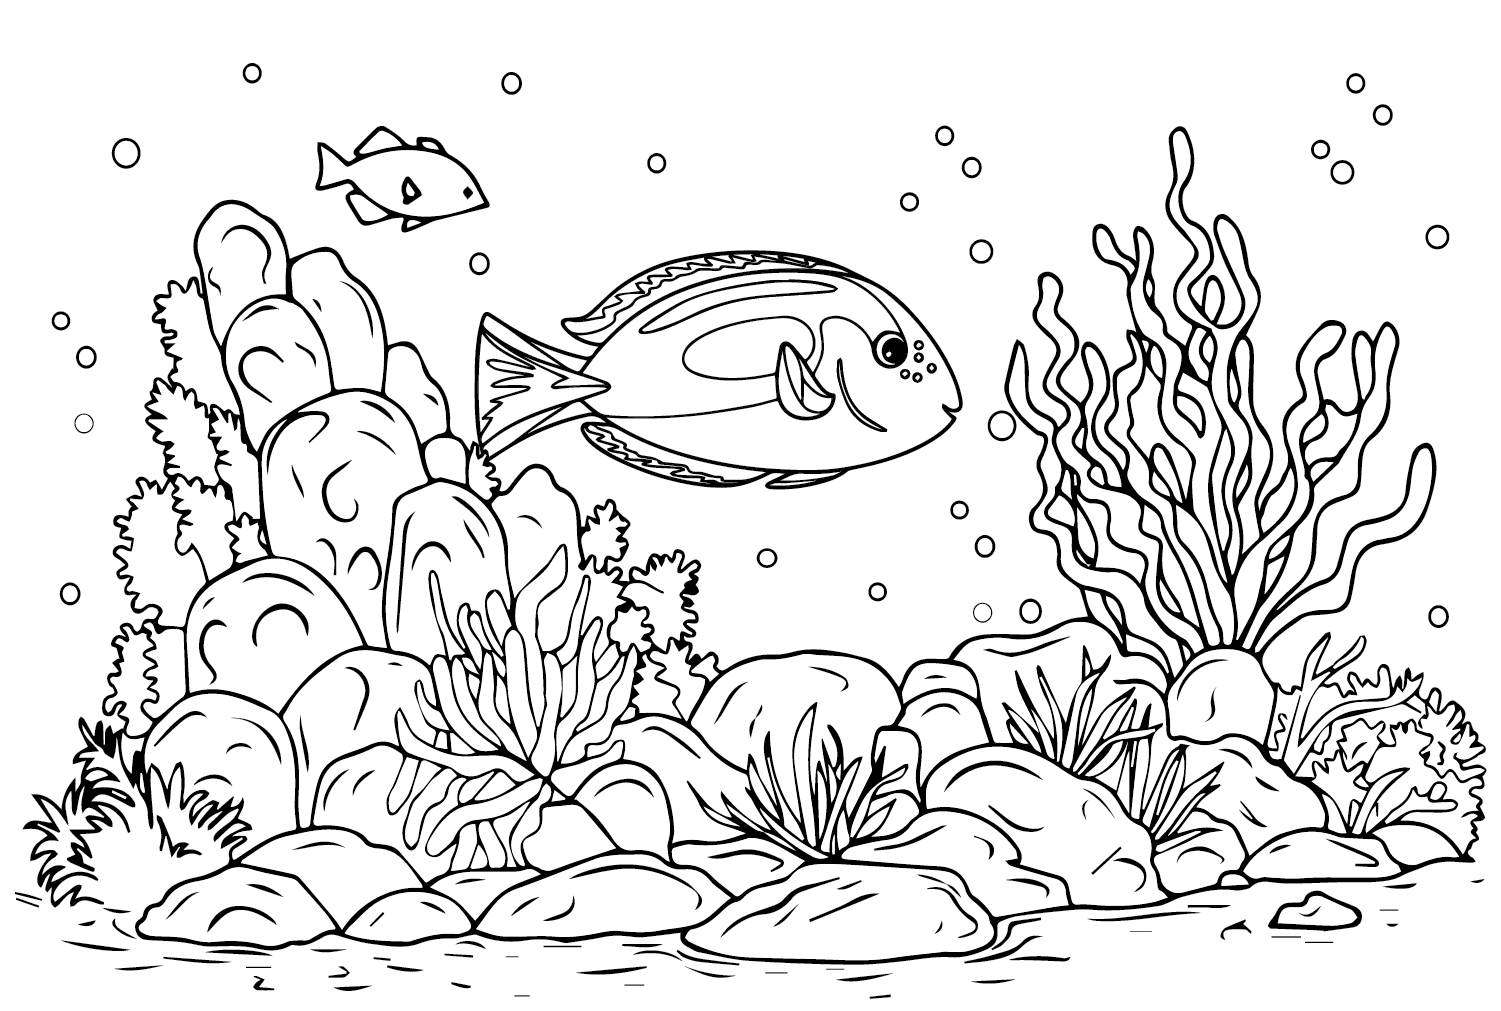 Tang Fish for Kids Coloring Page - Free Printable Coloring Pages